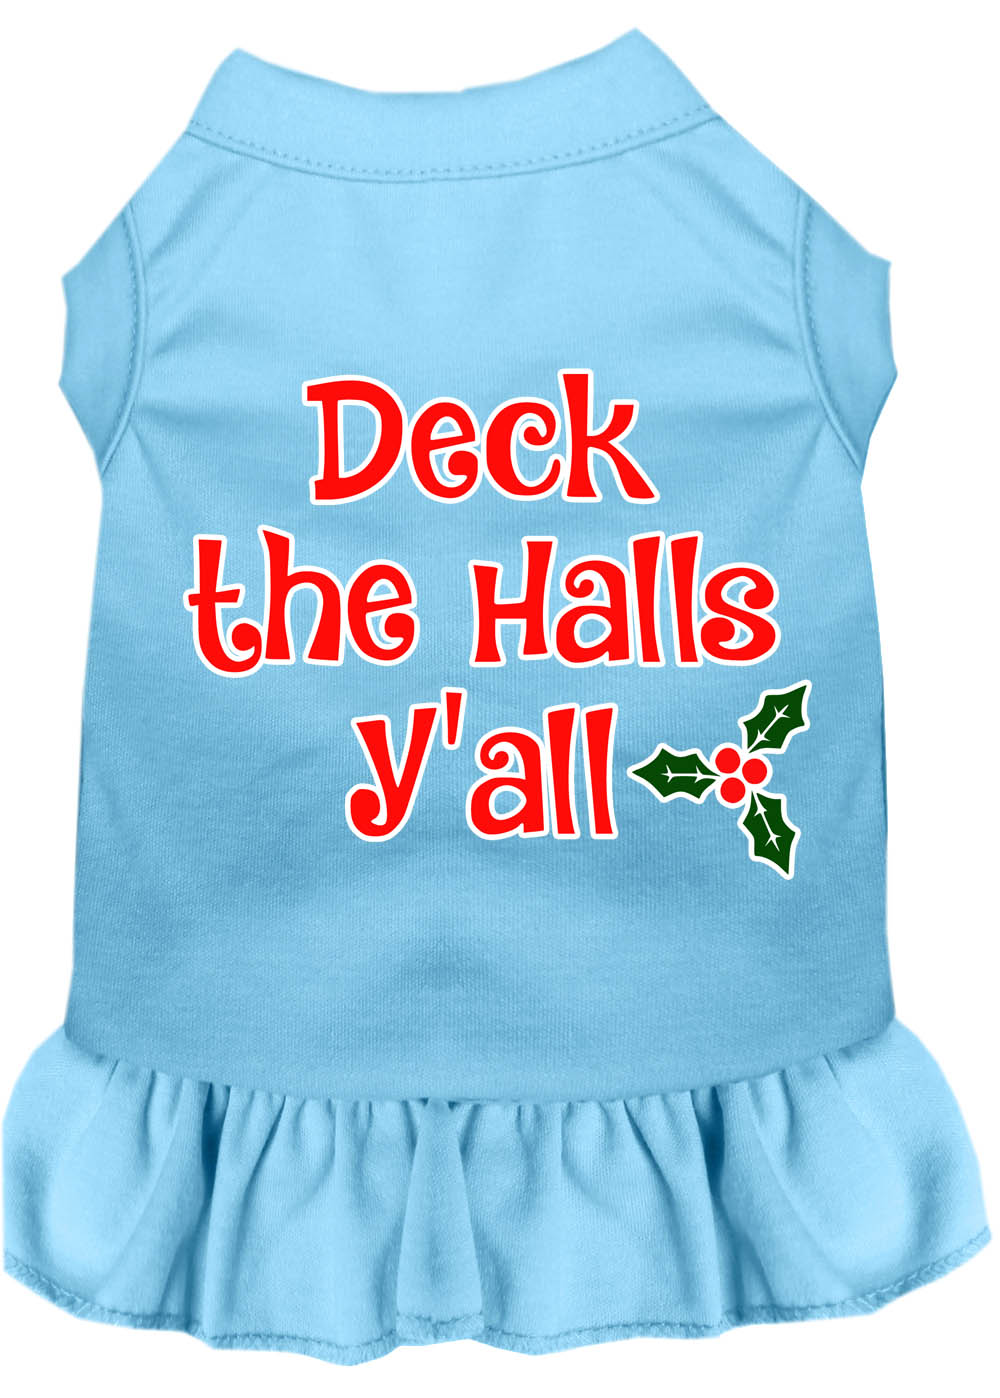 Deck the Halls Y'all Screen Print Dog Dress Baby Blue Med